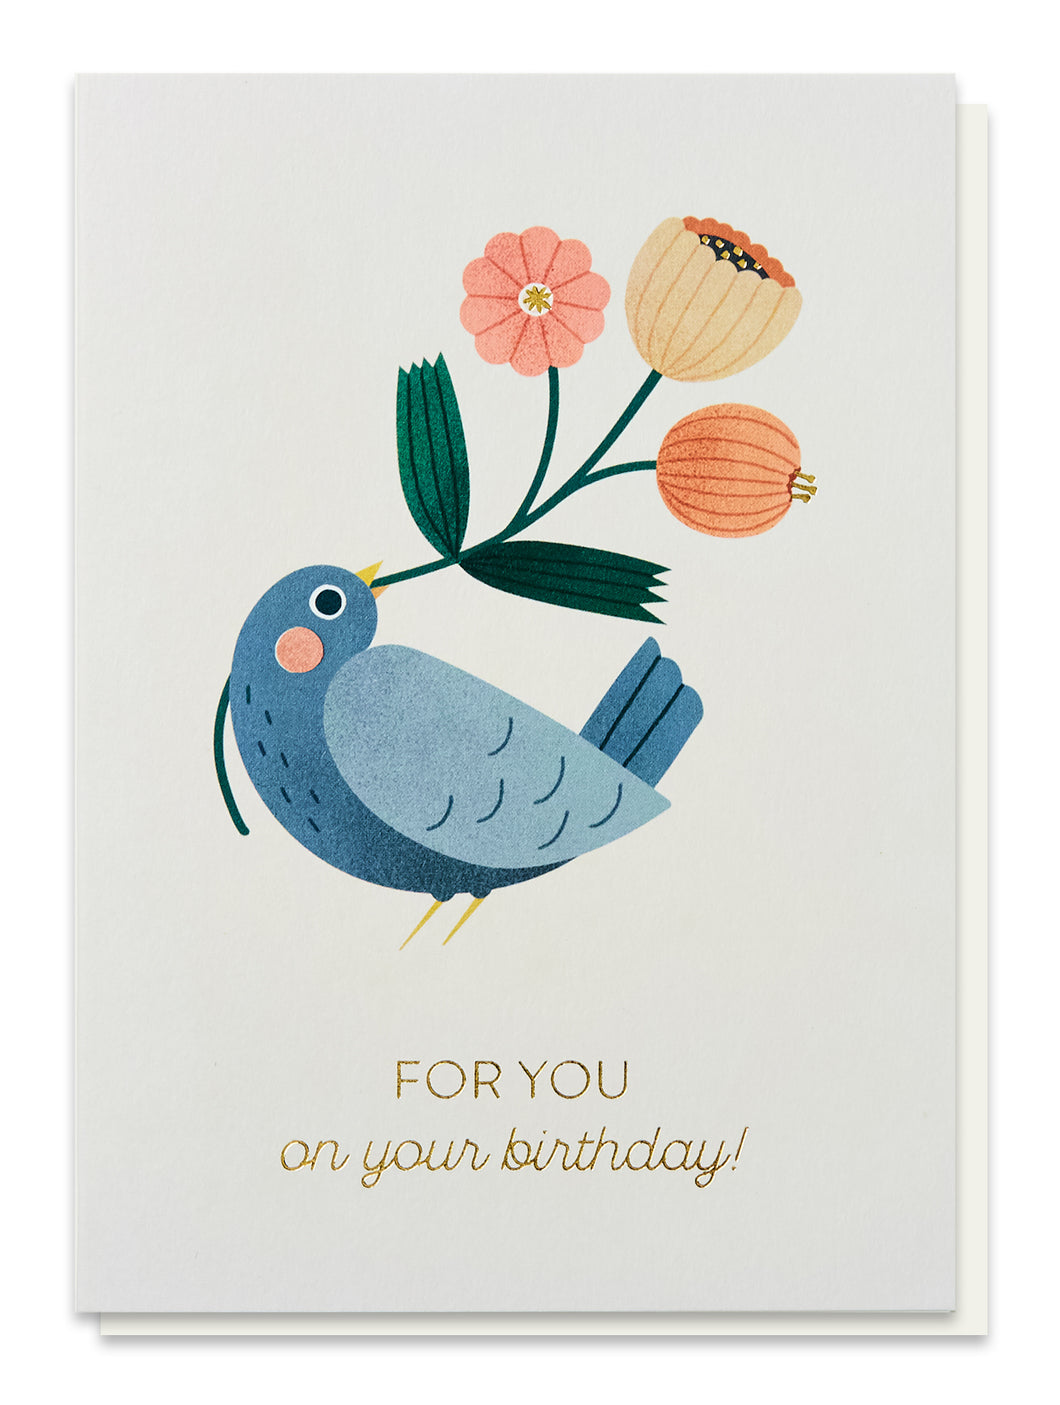 For You on your birthday - blue bird